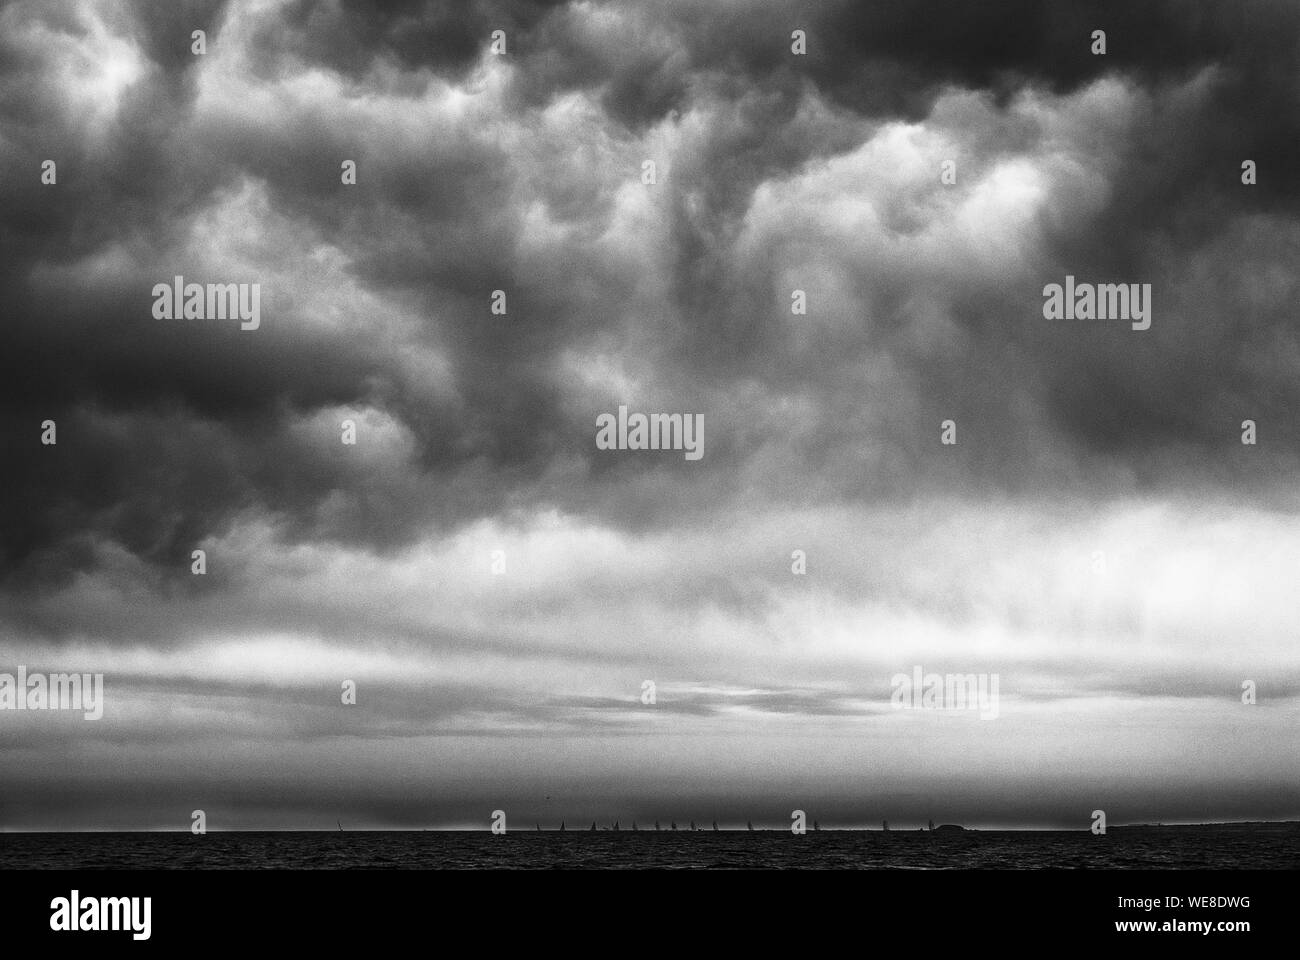 Ominous Clouds Over Beach Stock Photo